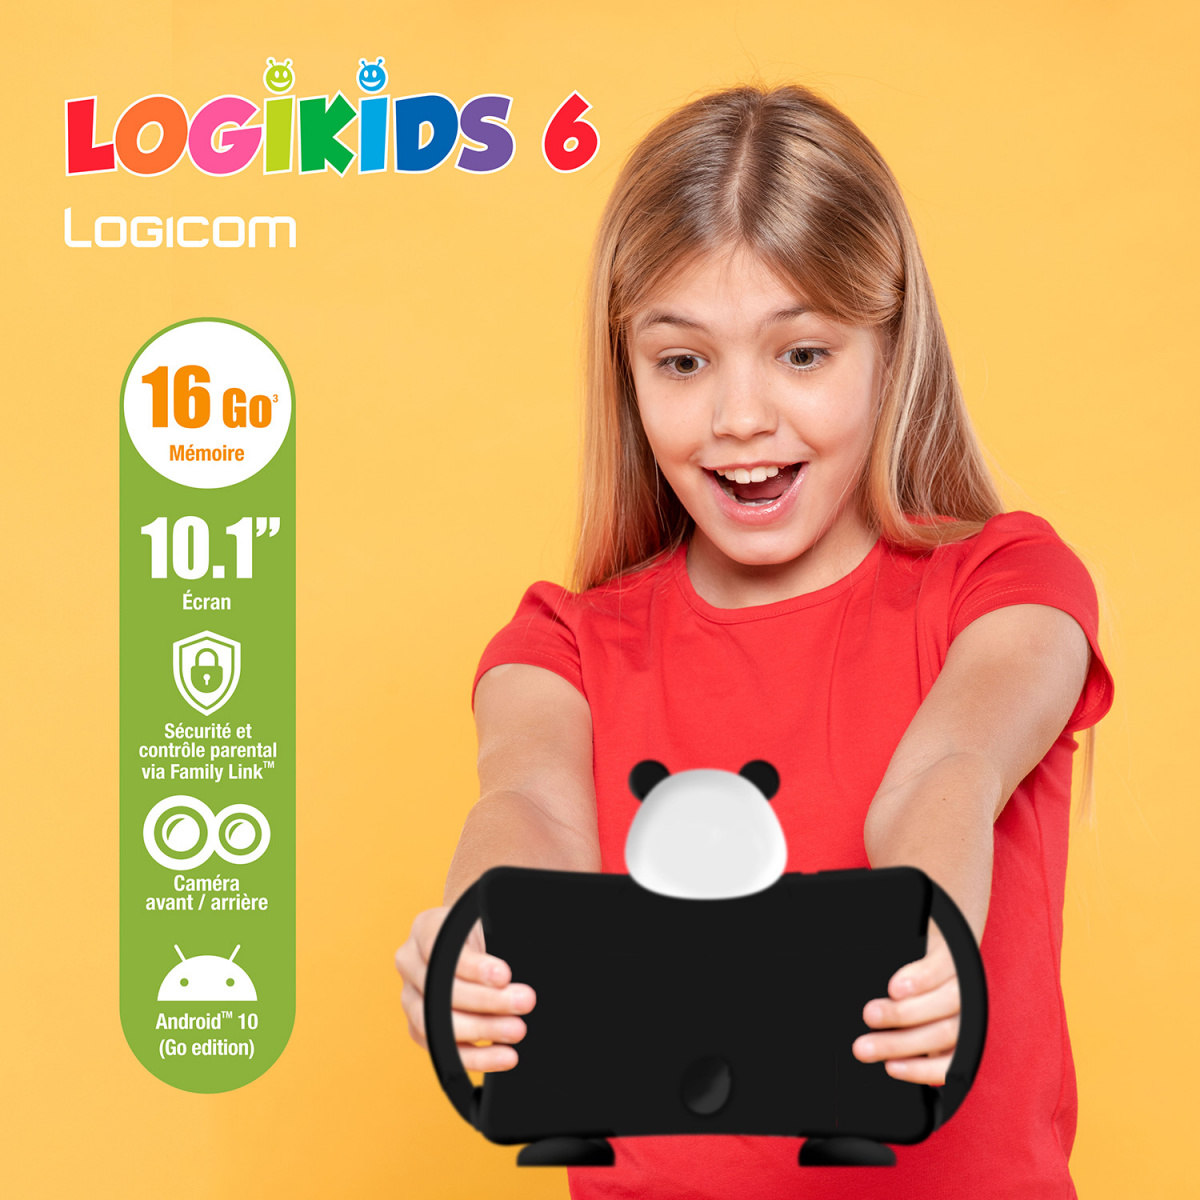 Protection Glass Flexible for Tablet Logicom Logikids 5 7 Inch